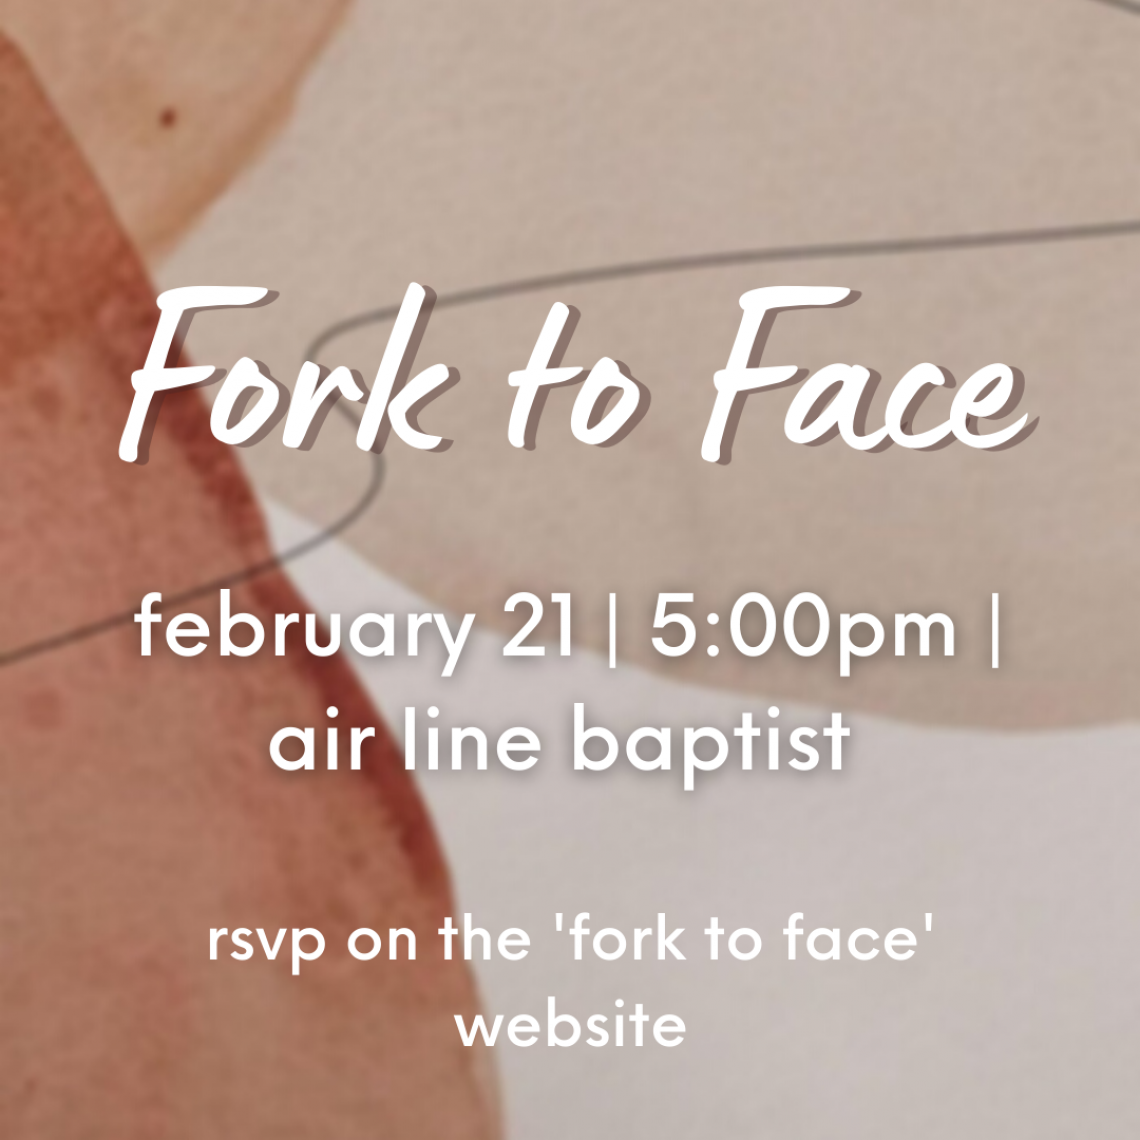 Ladies Discipleship Evening / Fork to Face